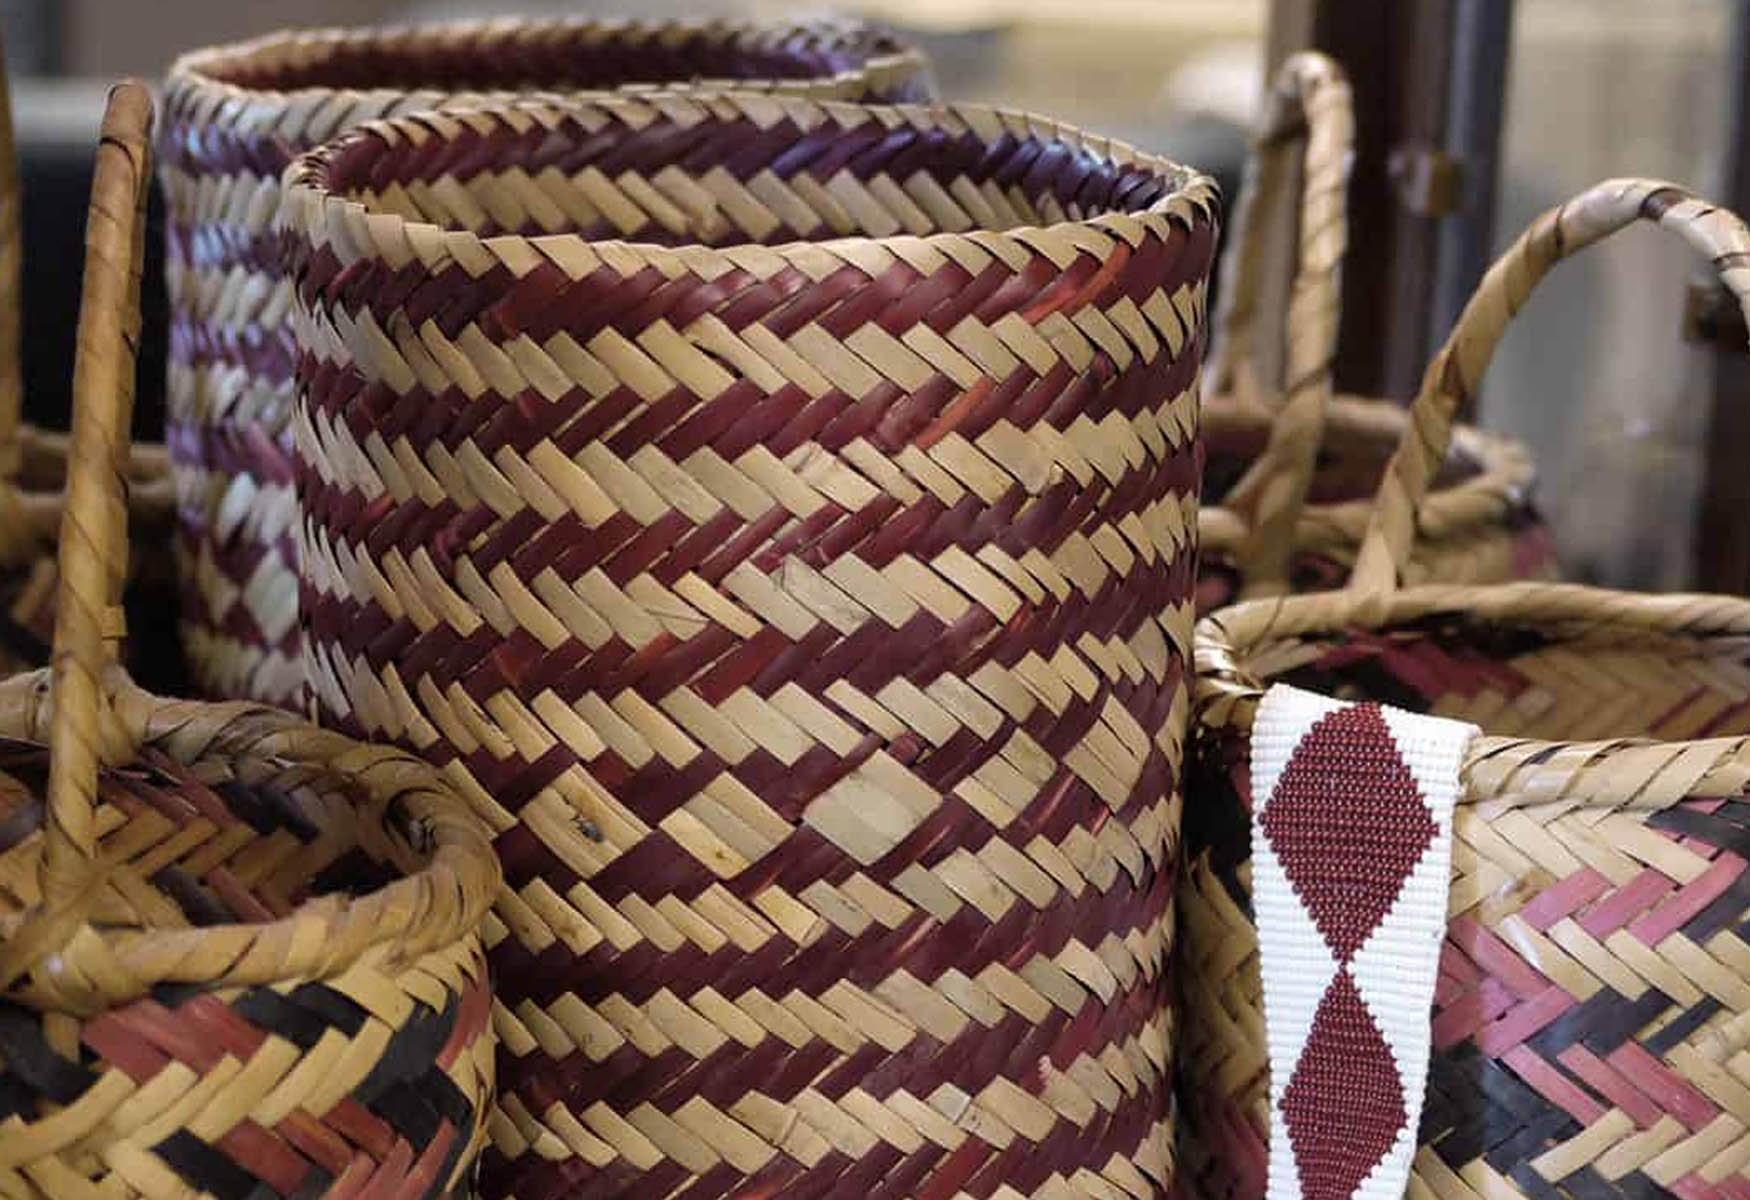 9-extraordinary-facts-about-basketry